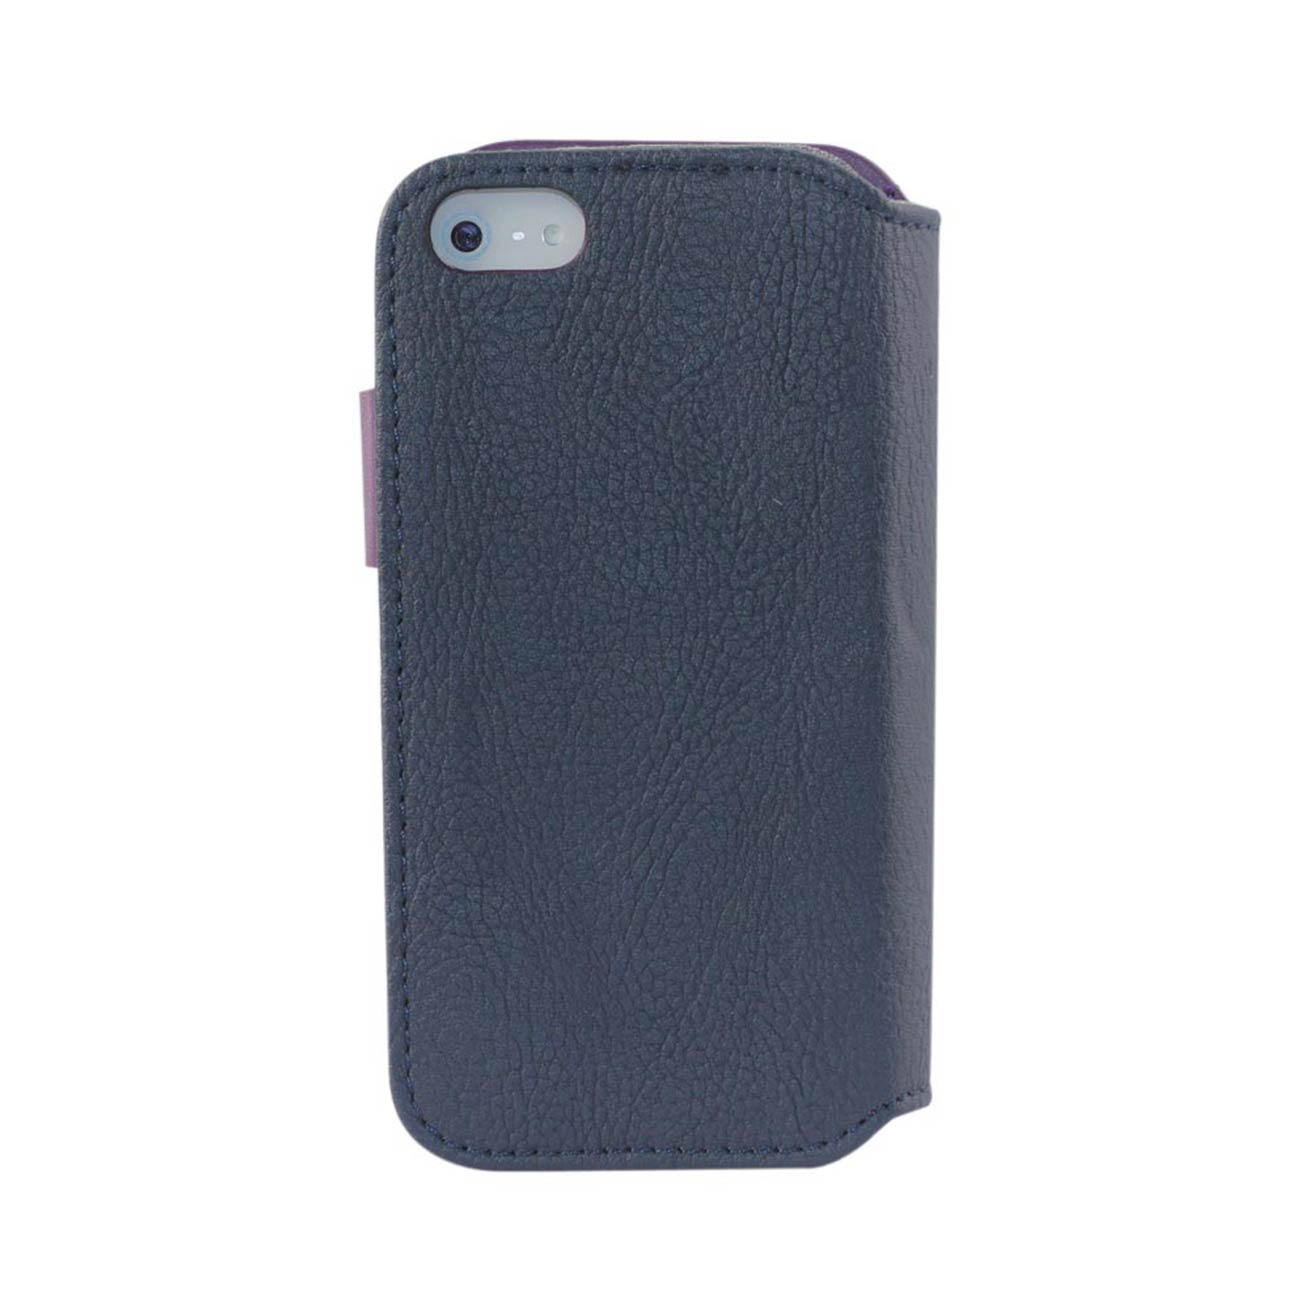 iPhone 5/5S/Se Leather Flip Case With Buckle Closure In Navy